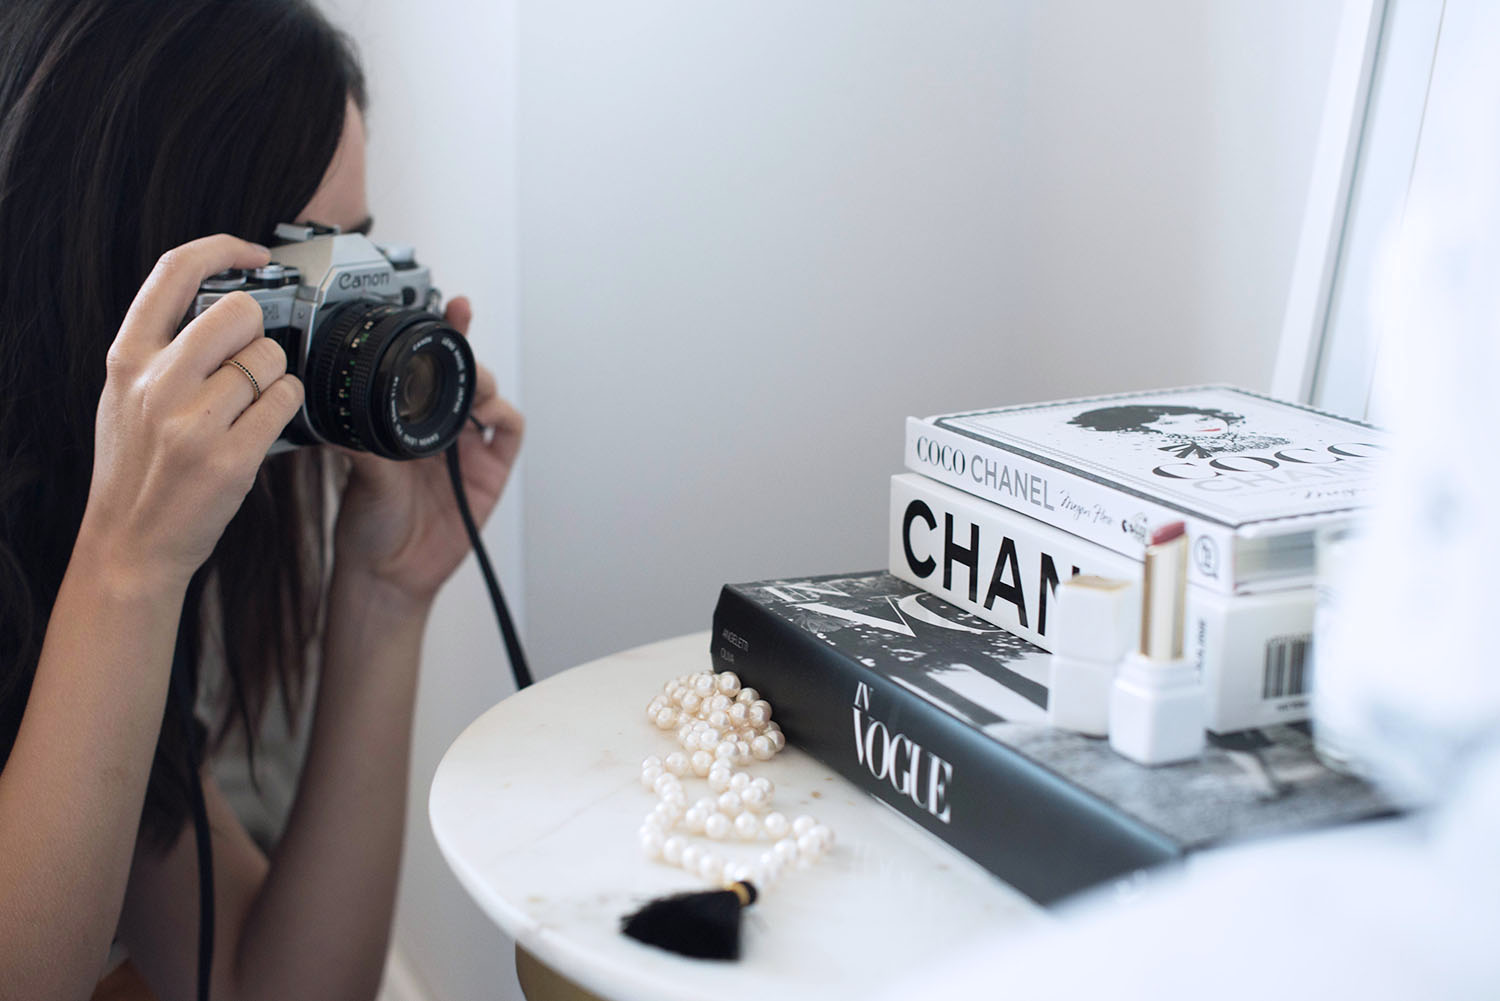 Top Canadian fashion blogger Cee Fardoe of Coco & Vera uses a Canon A1-E camera to take photos of a pile of books on her side table